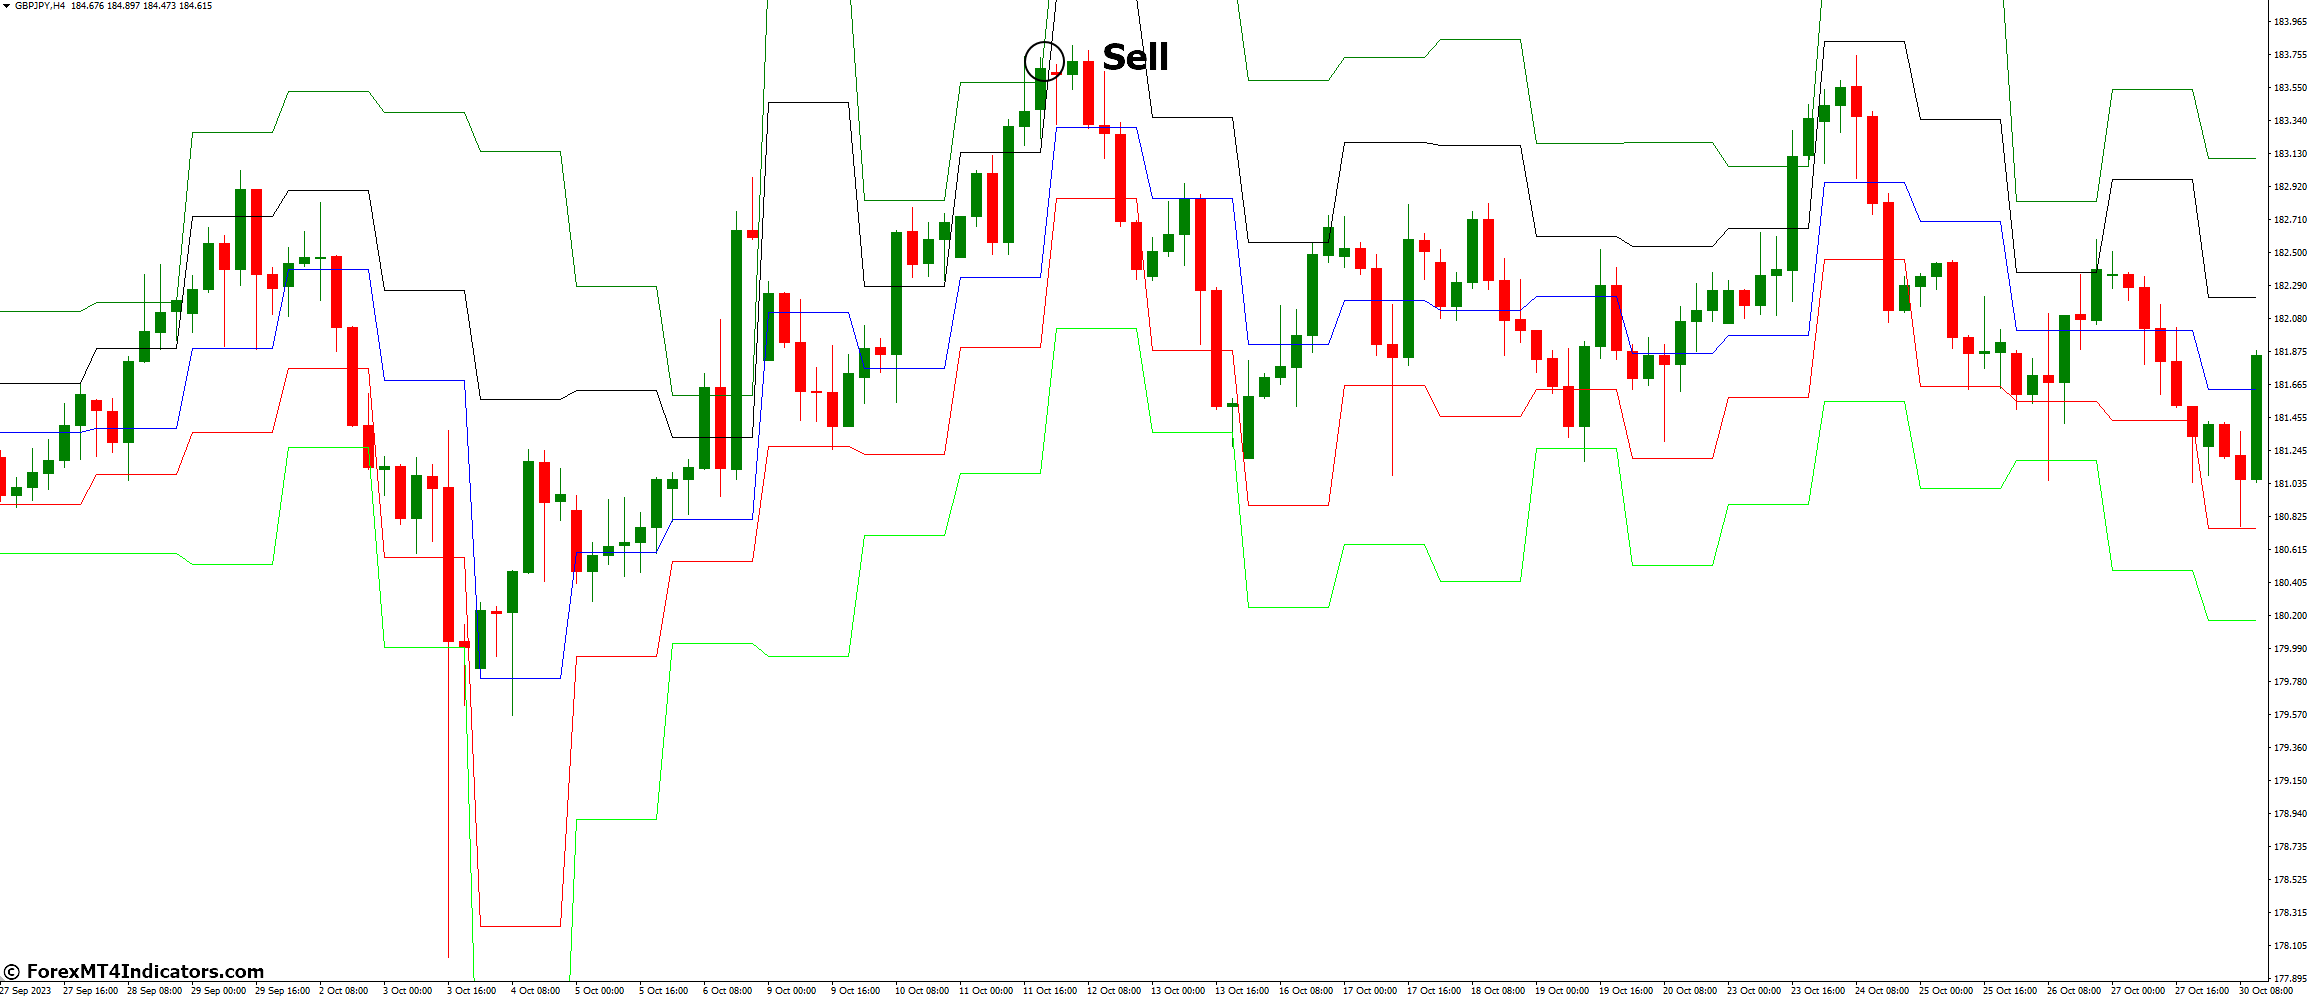 How to Trade with DeMarker Pivots Indicator - Sell Entry